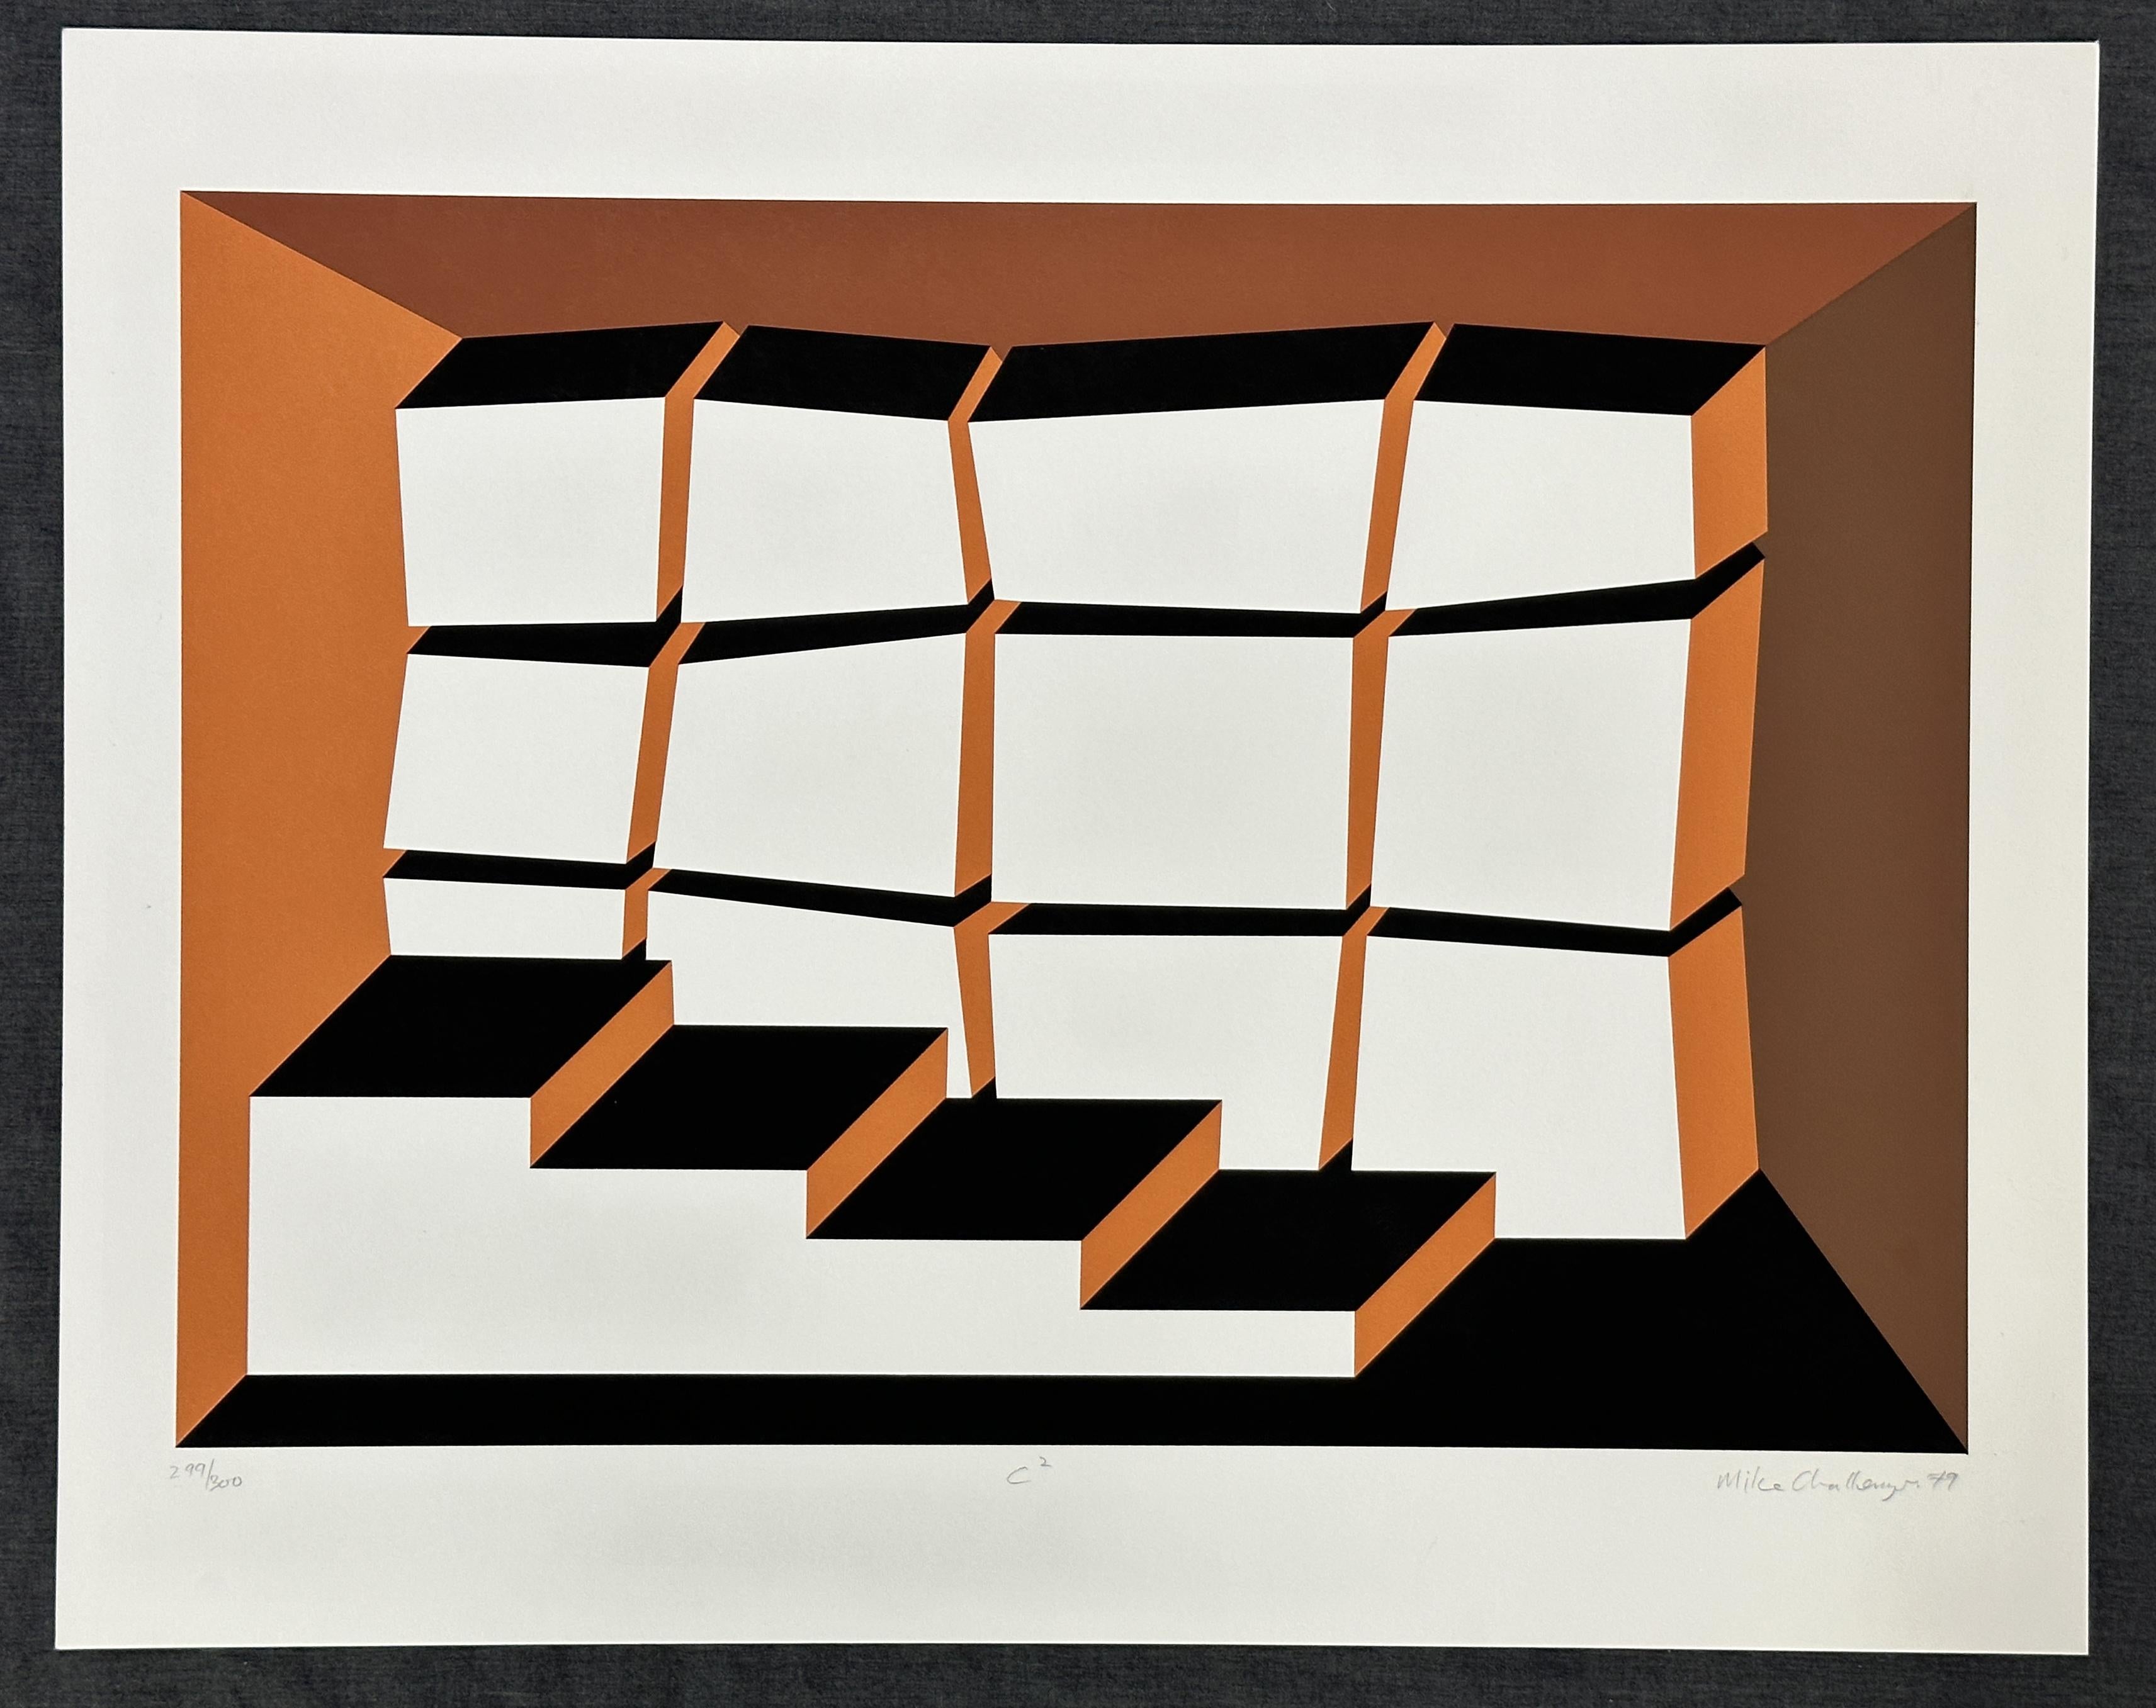 Michael Challenger C2 - 1979
Screen Print
Paper Size 18'' x 25'' 

Edition: Signed in pencil, titled, dated and marked 299/300

Michael Challenger's work is a powerful interplay of op-art and constructivism. His graphic work evokes the